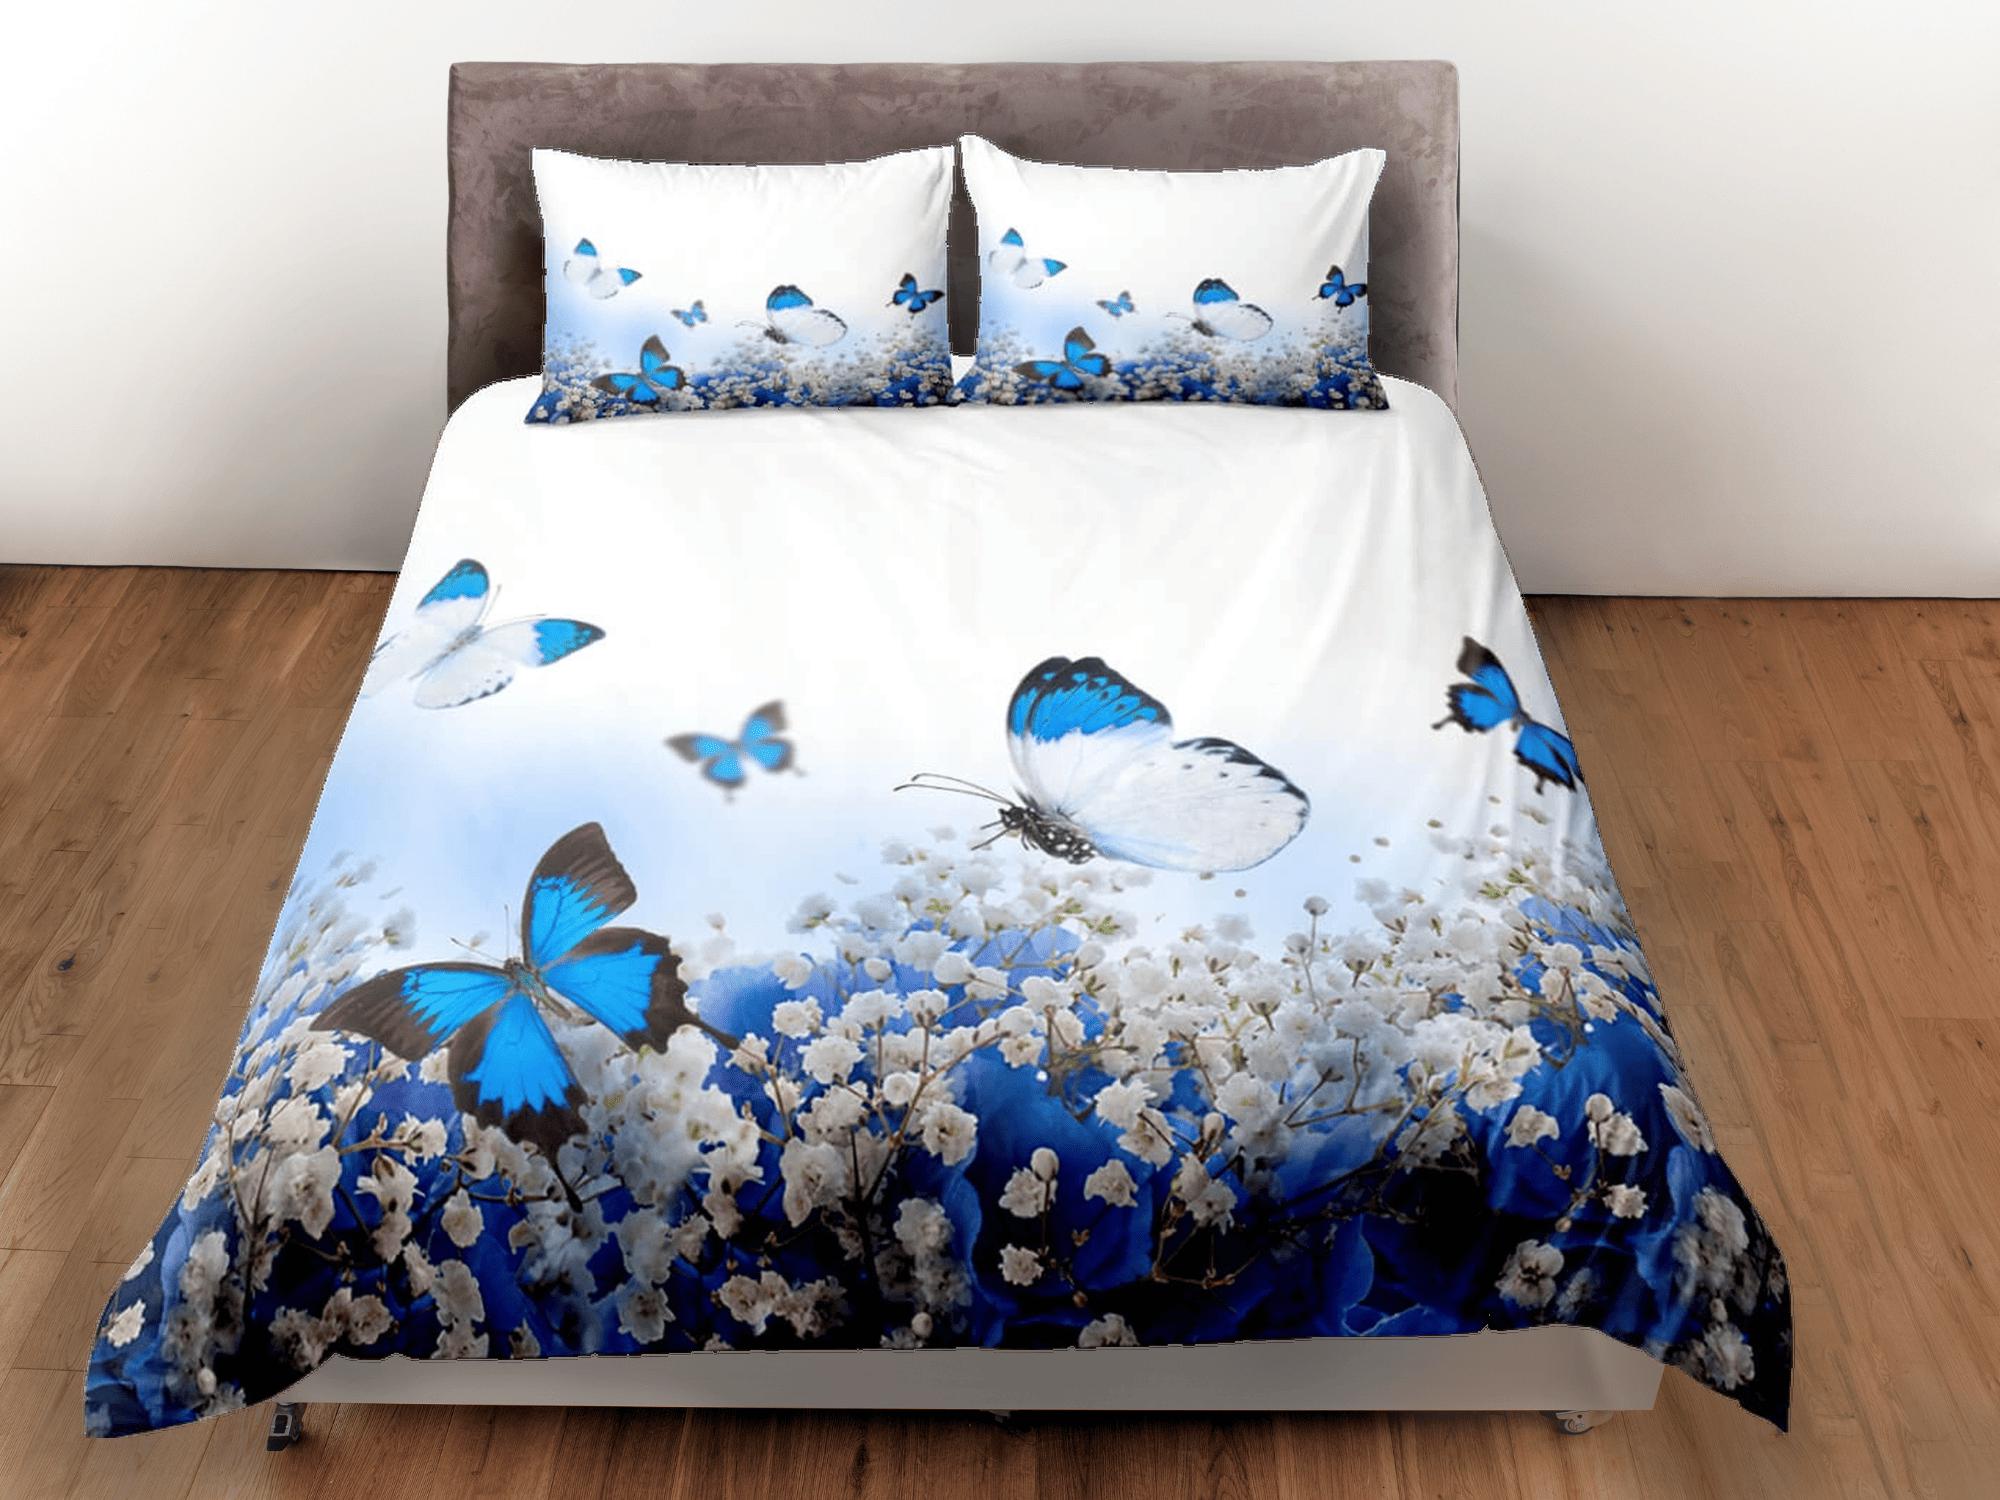 daintyduvet Blue monarch butterfly bedding duvet cover colorful dorm bedding, full size adult duvet king queen twin, butterfly nursery toddler bedding